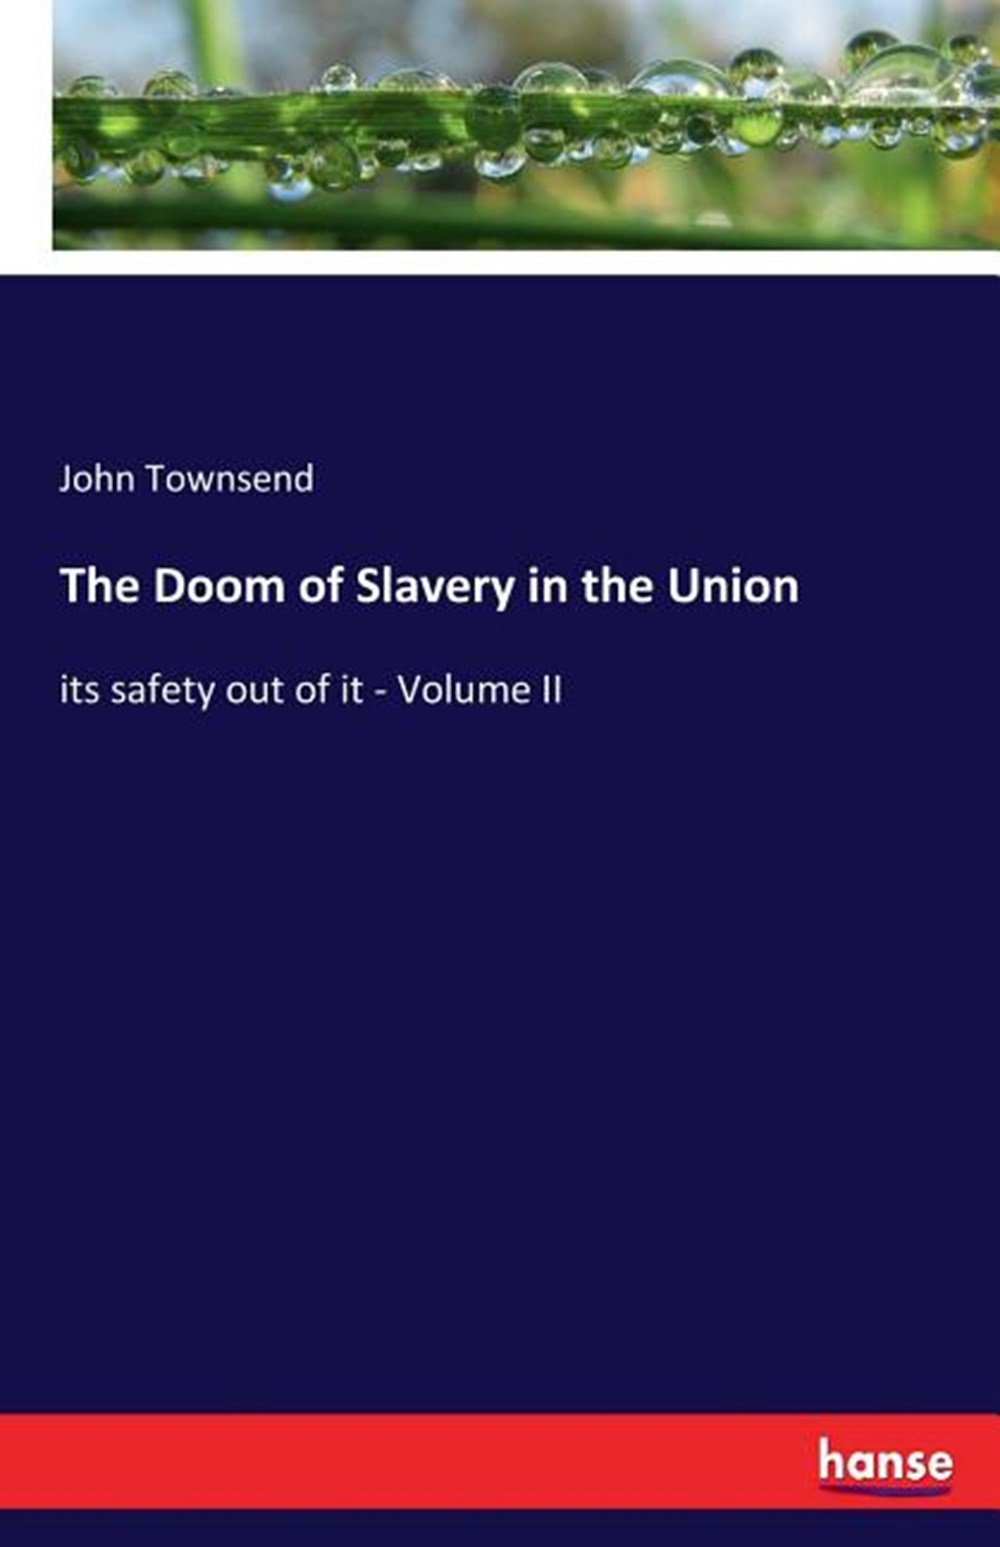 Doom of Slavery in the Union: its safety out of it - Volume II